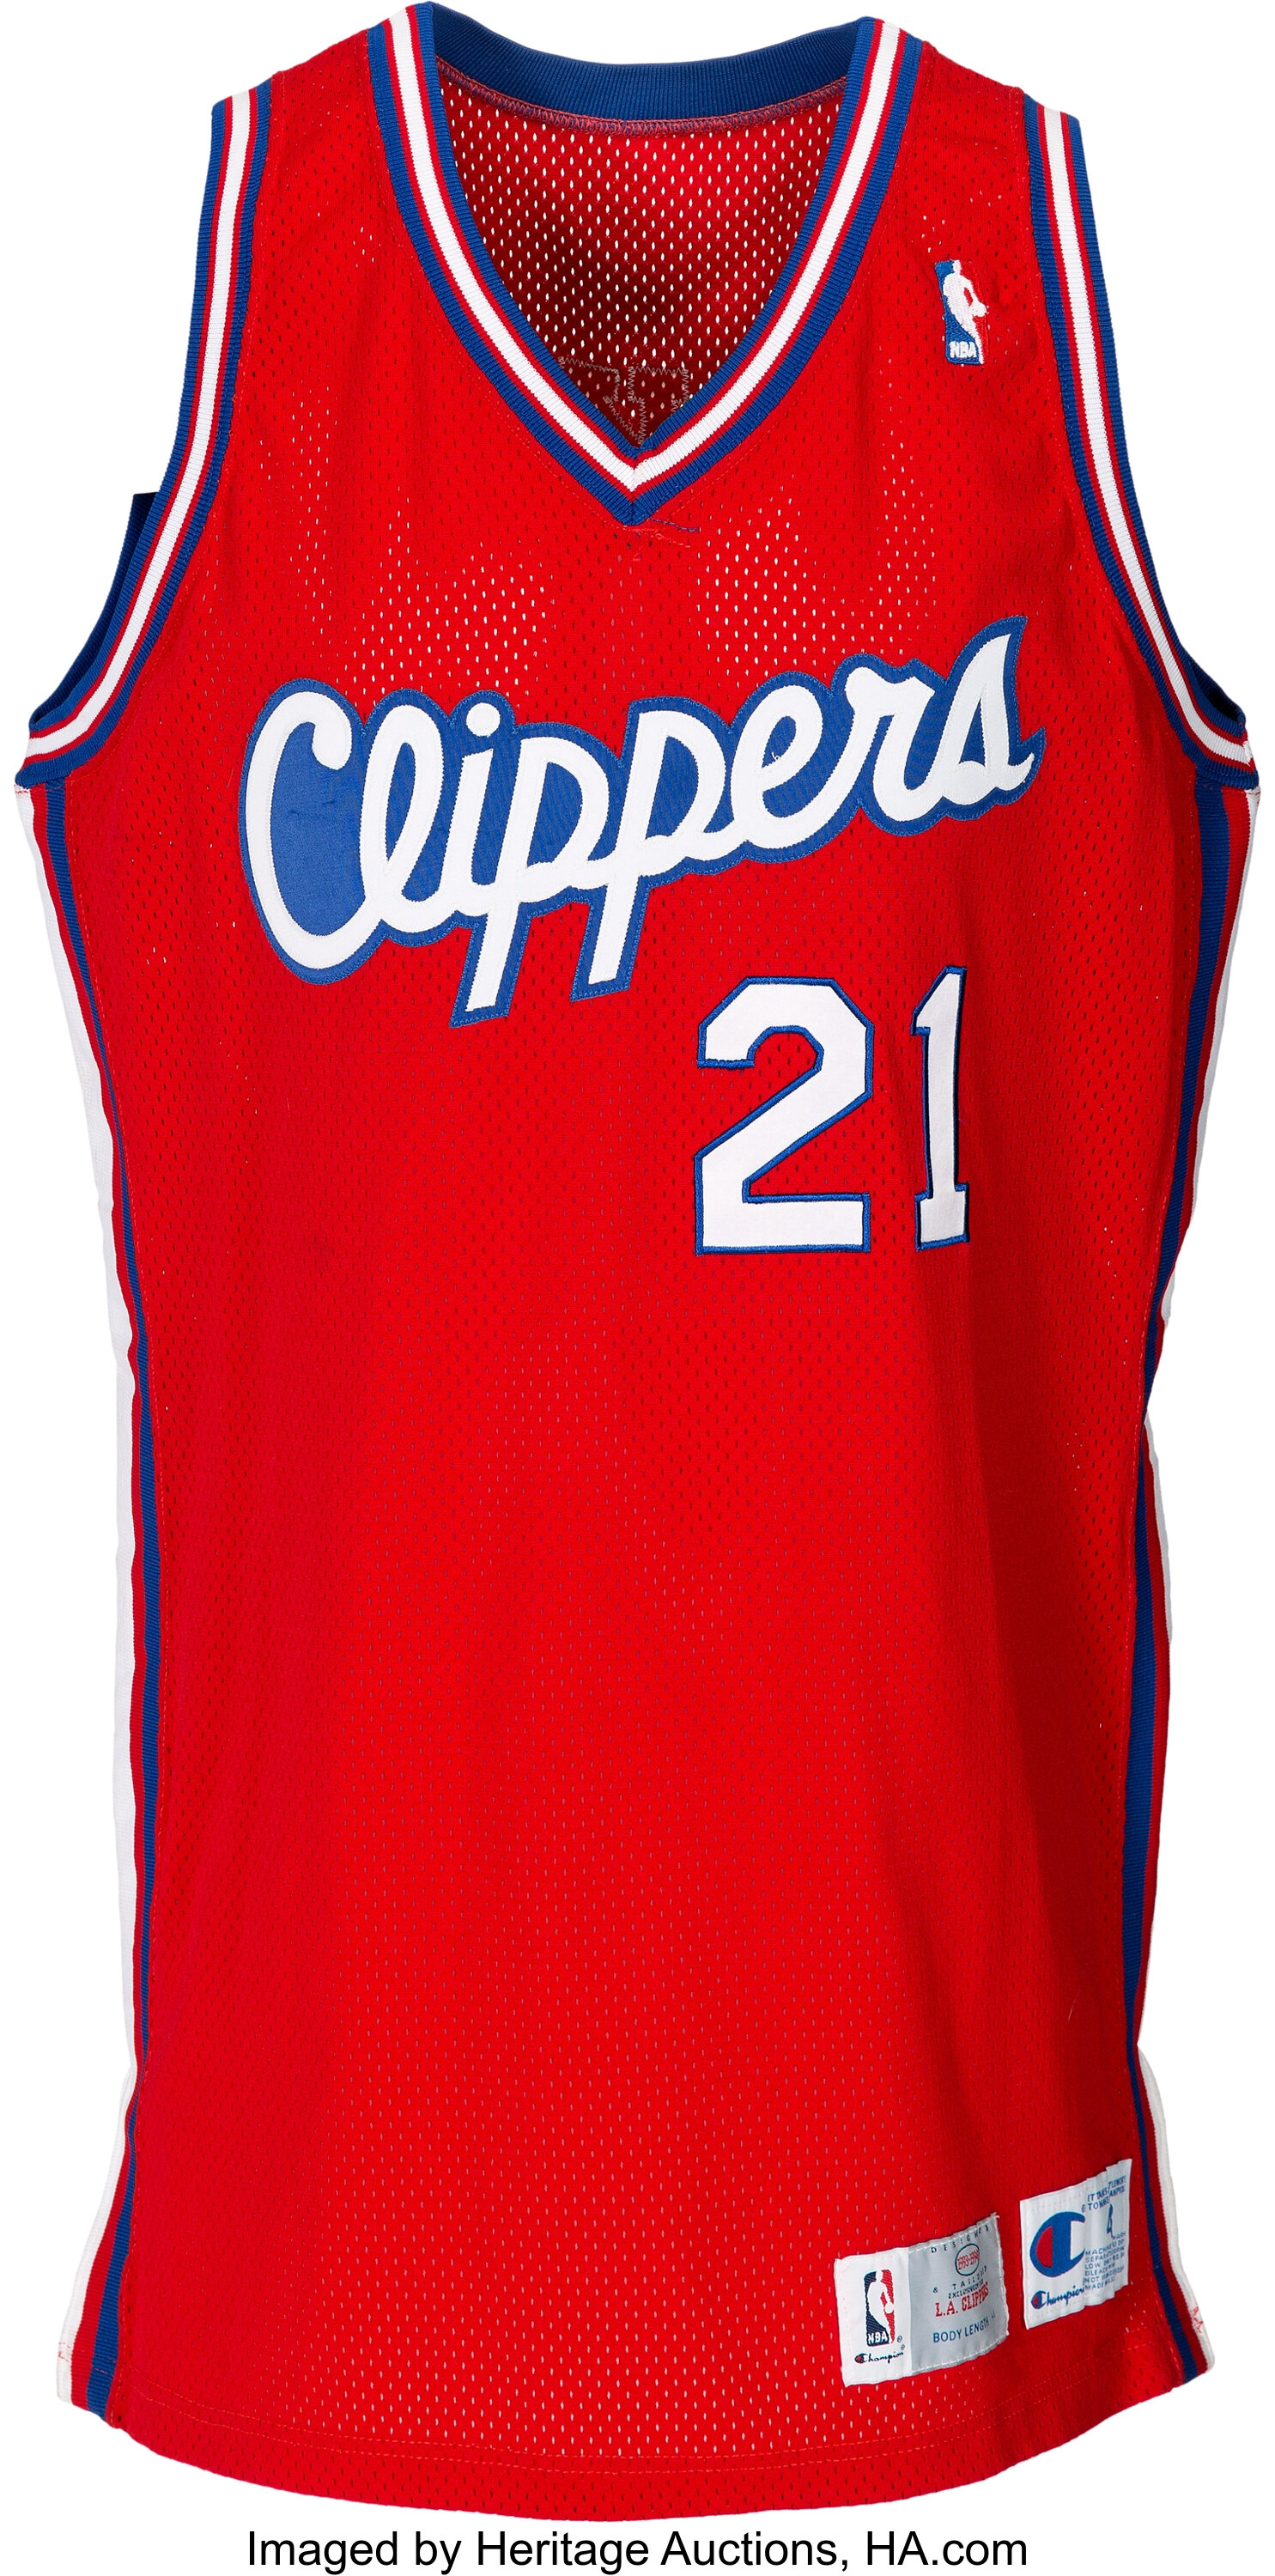 Los Angeles Clippers Jerseys, Clippers Uniforms, Jersey